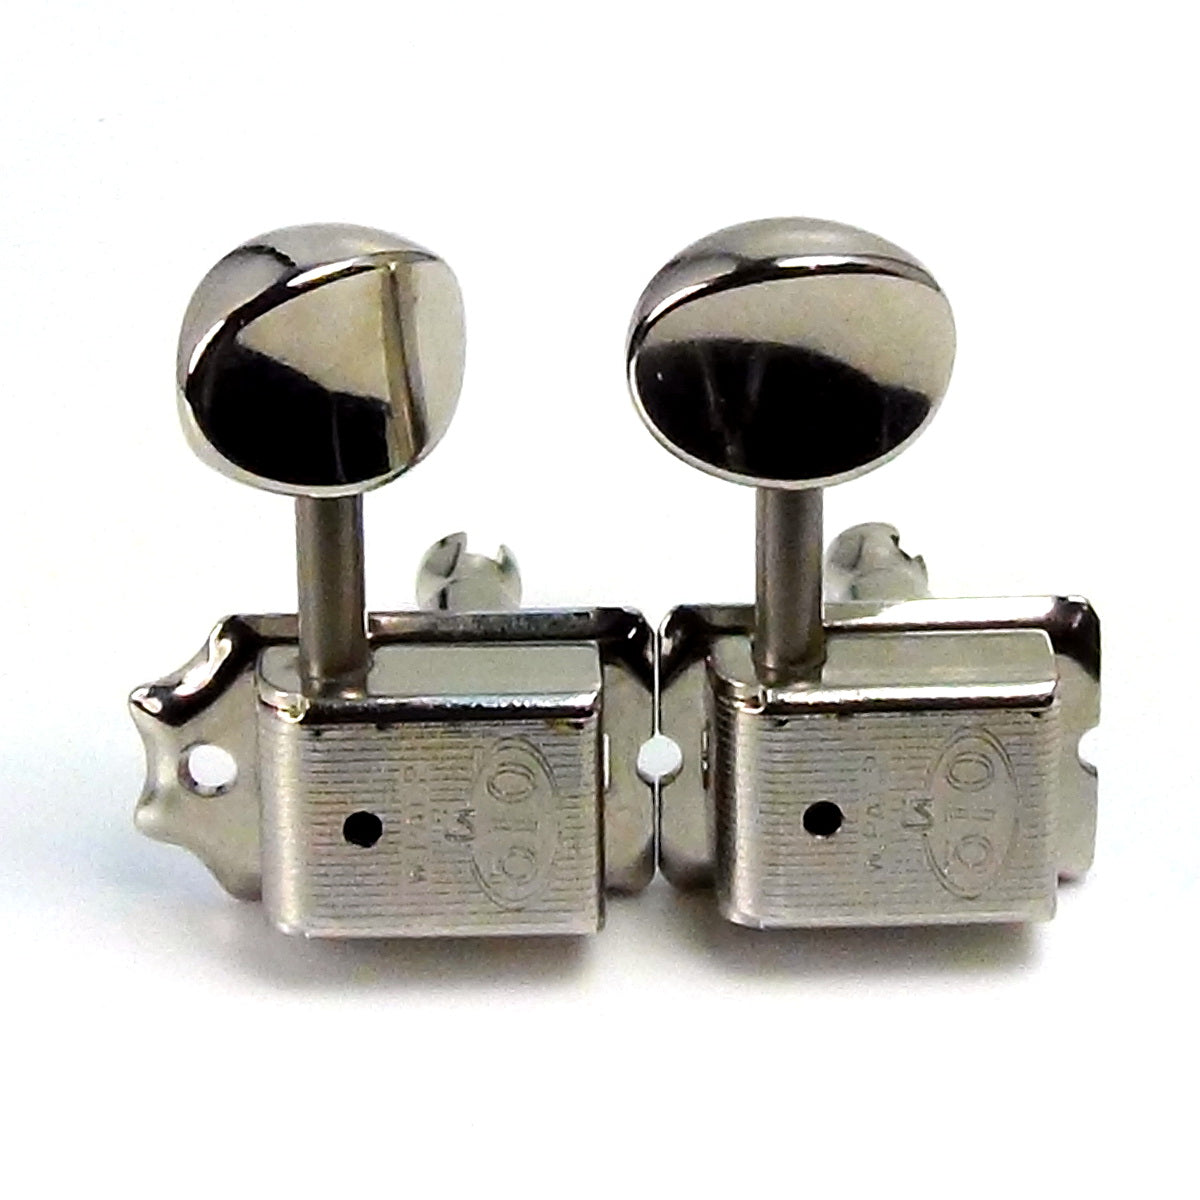 Gotoh SDS510 6 a side Tuners in Nickel